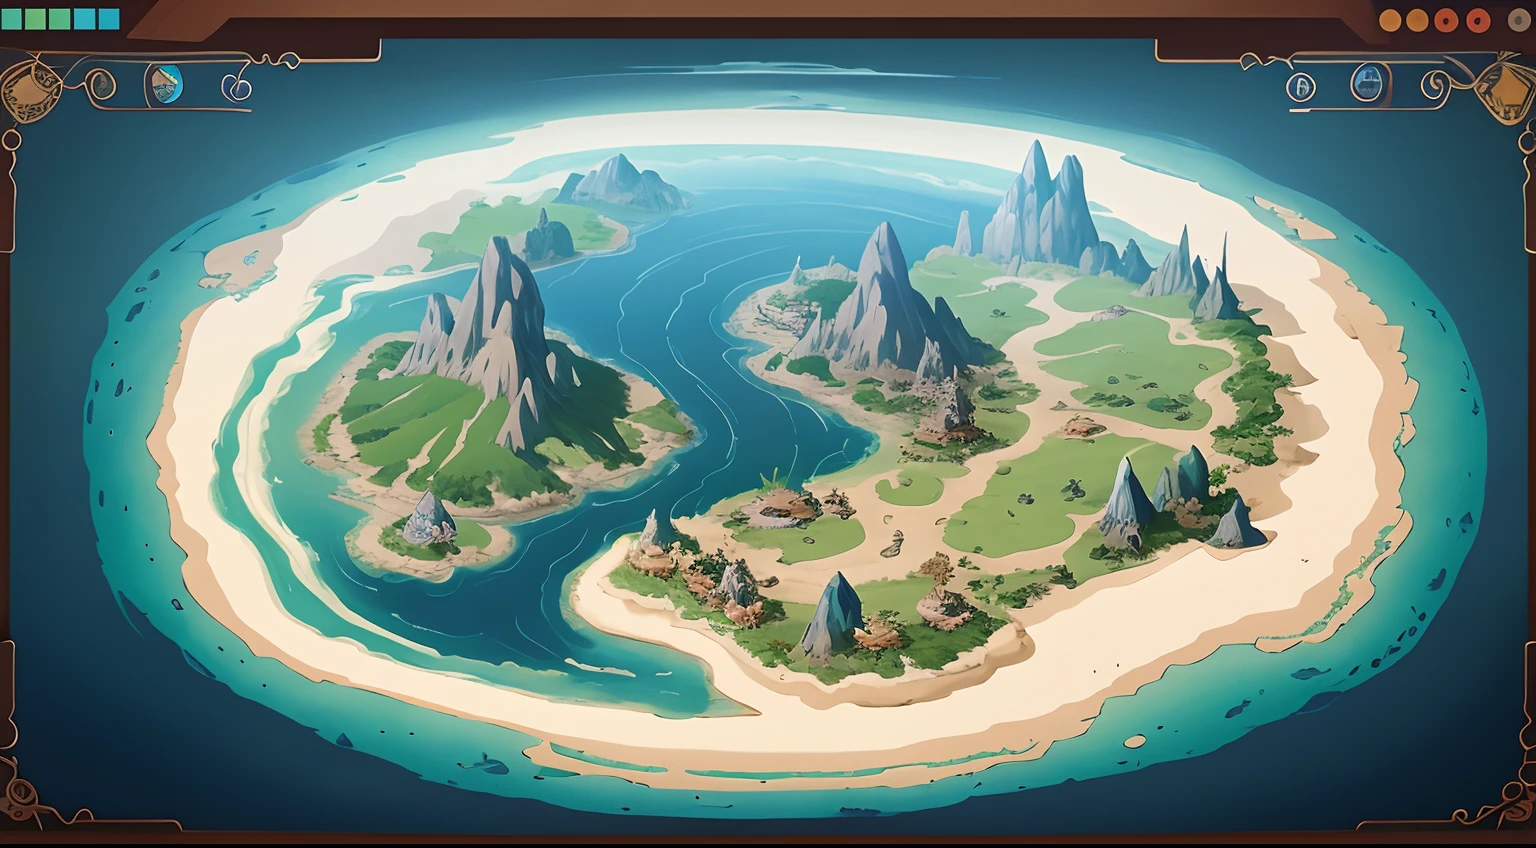 cartoon-style illustration，A small island located in the middle of a body of water, epic matte painting of an island, legend of korra setting, Stylized concept art, concept art 8 k resolution, concept art 8k resolution, isometric 3d fantasy island, Island background, Official concept art, 4 k hd illustrative wallpaper, an isometric fantasy map